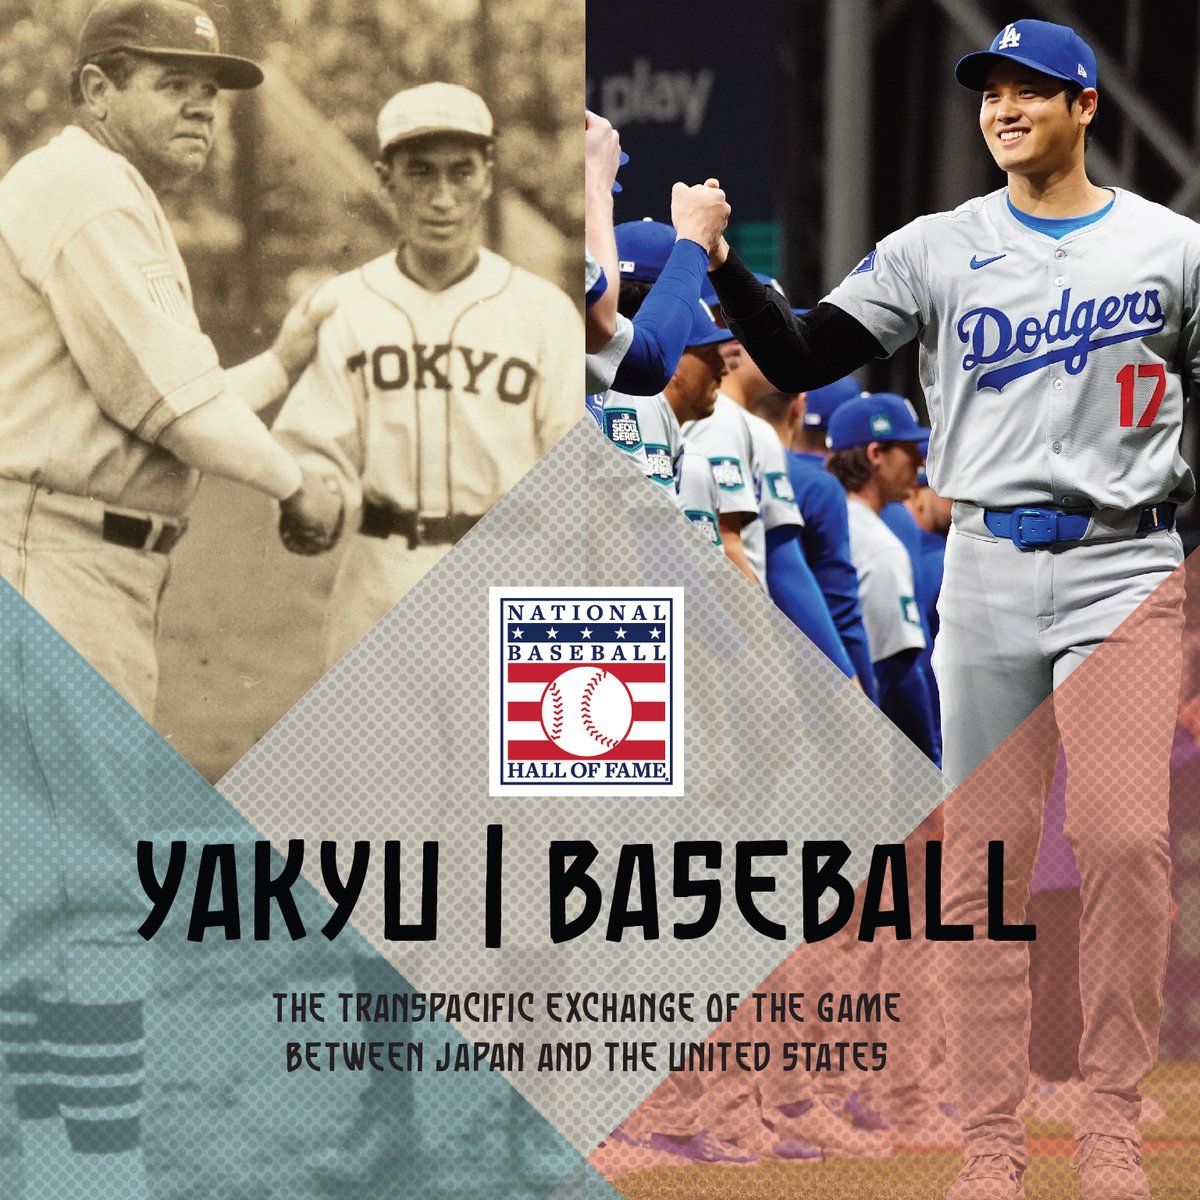 The National Baseball Hall of Fame and Museum has announced a new exhibit exploring the wide-ranging exchange of baseball between Japan and the United States, which will open in July 2025. baseballhall.org/yakyu